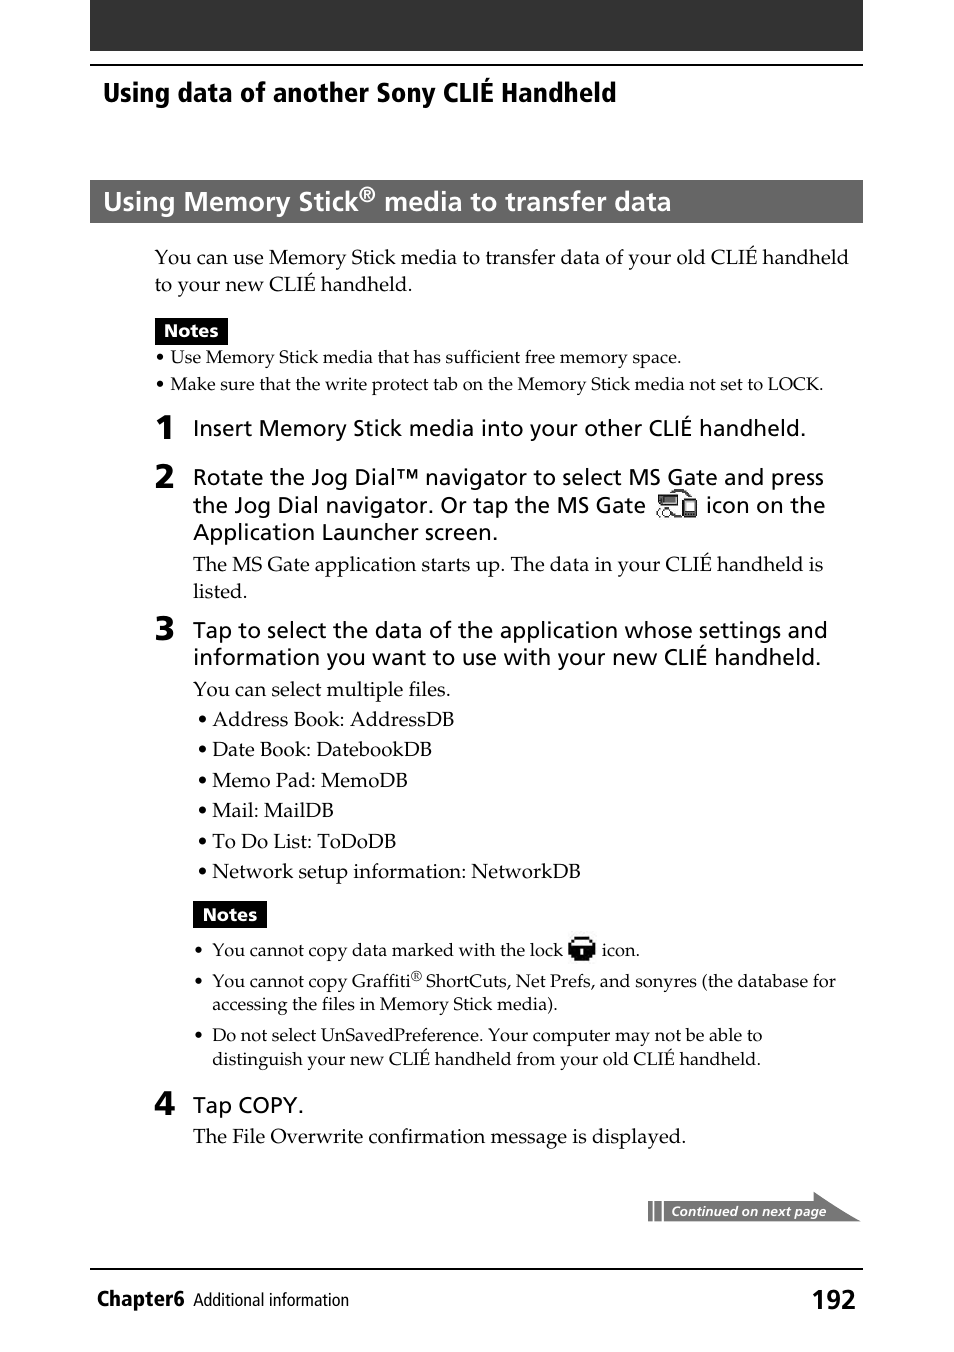 Using memory stick® media to transfer data, Using memory stick, Media | To transfer data, Media to transfer data, Using data of another sony clié handheld | Sony PEG-T415G User Manual | Page 192 / 220